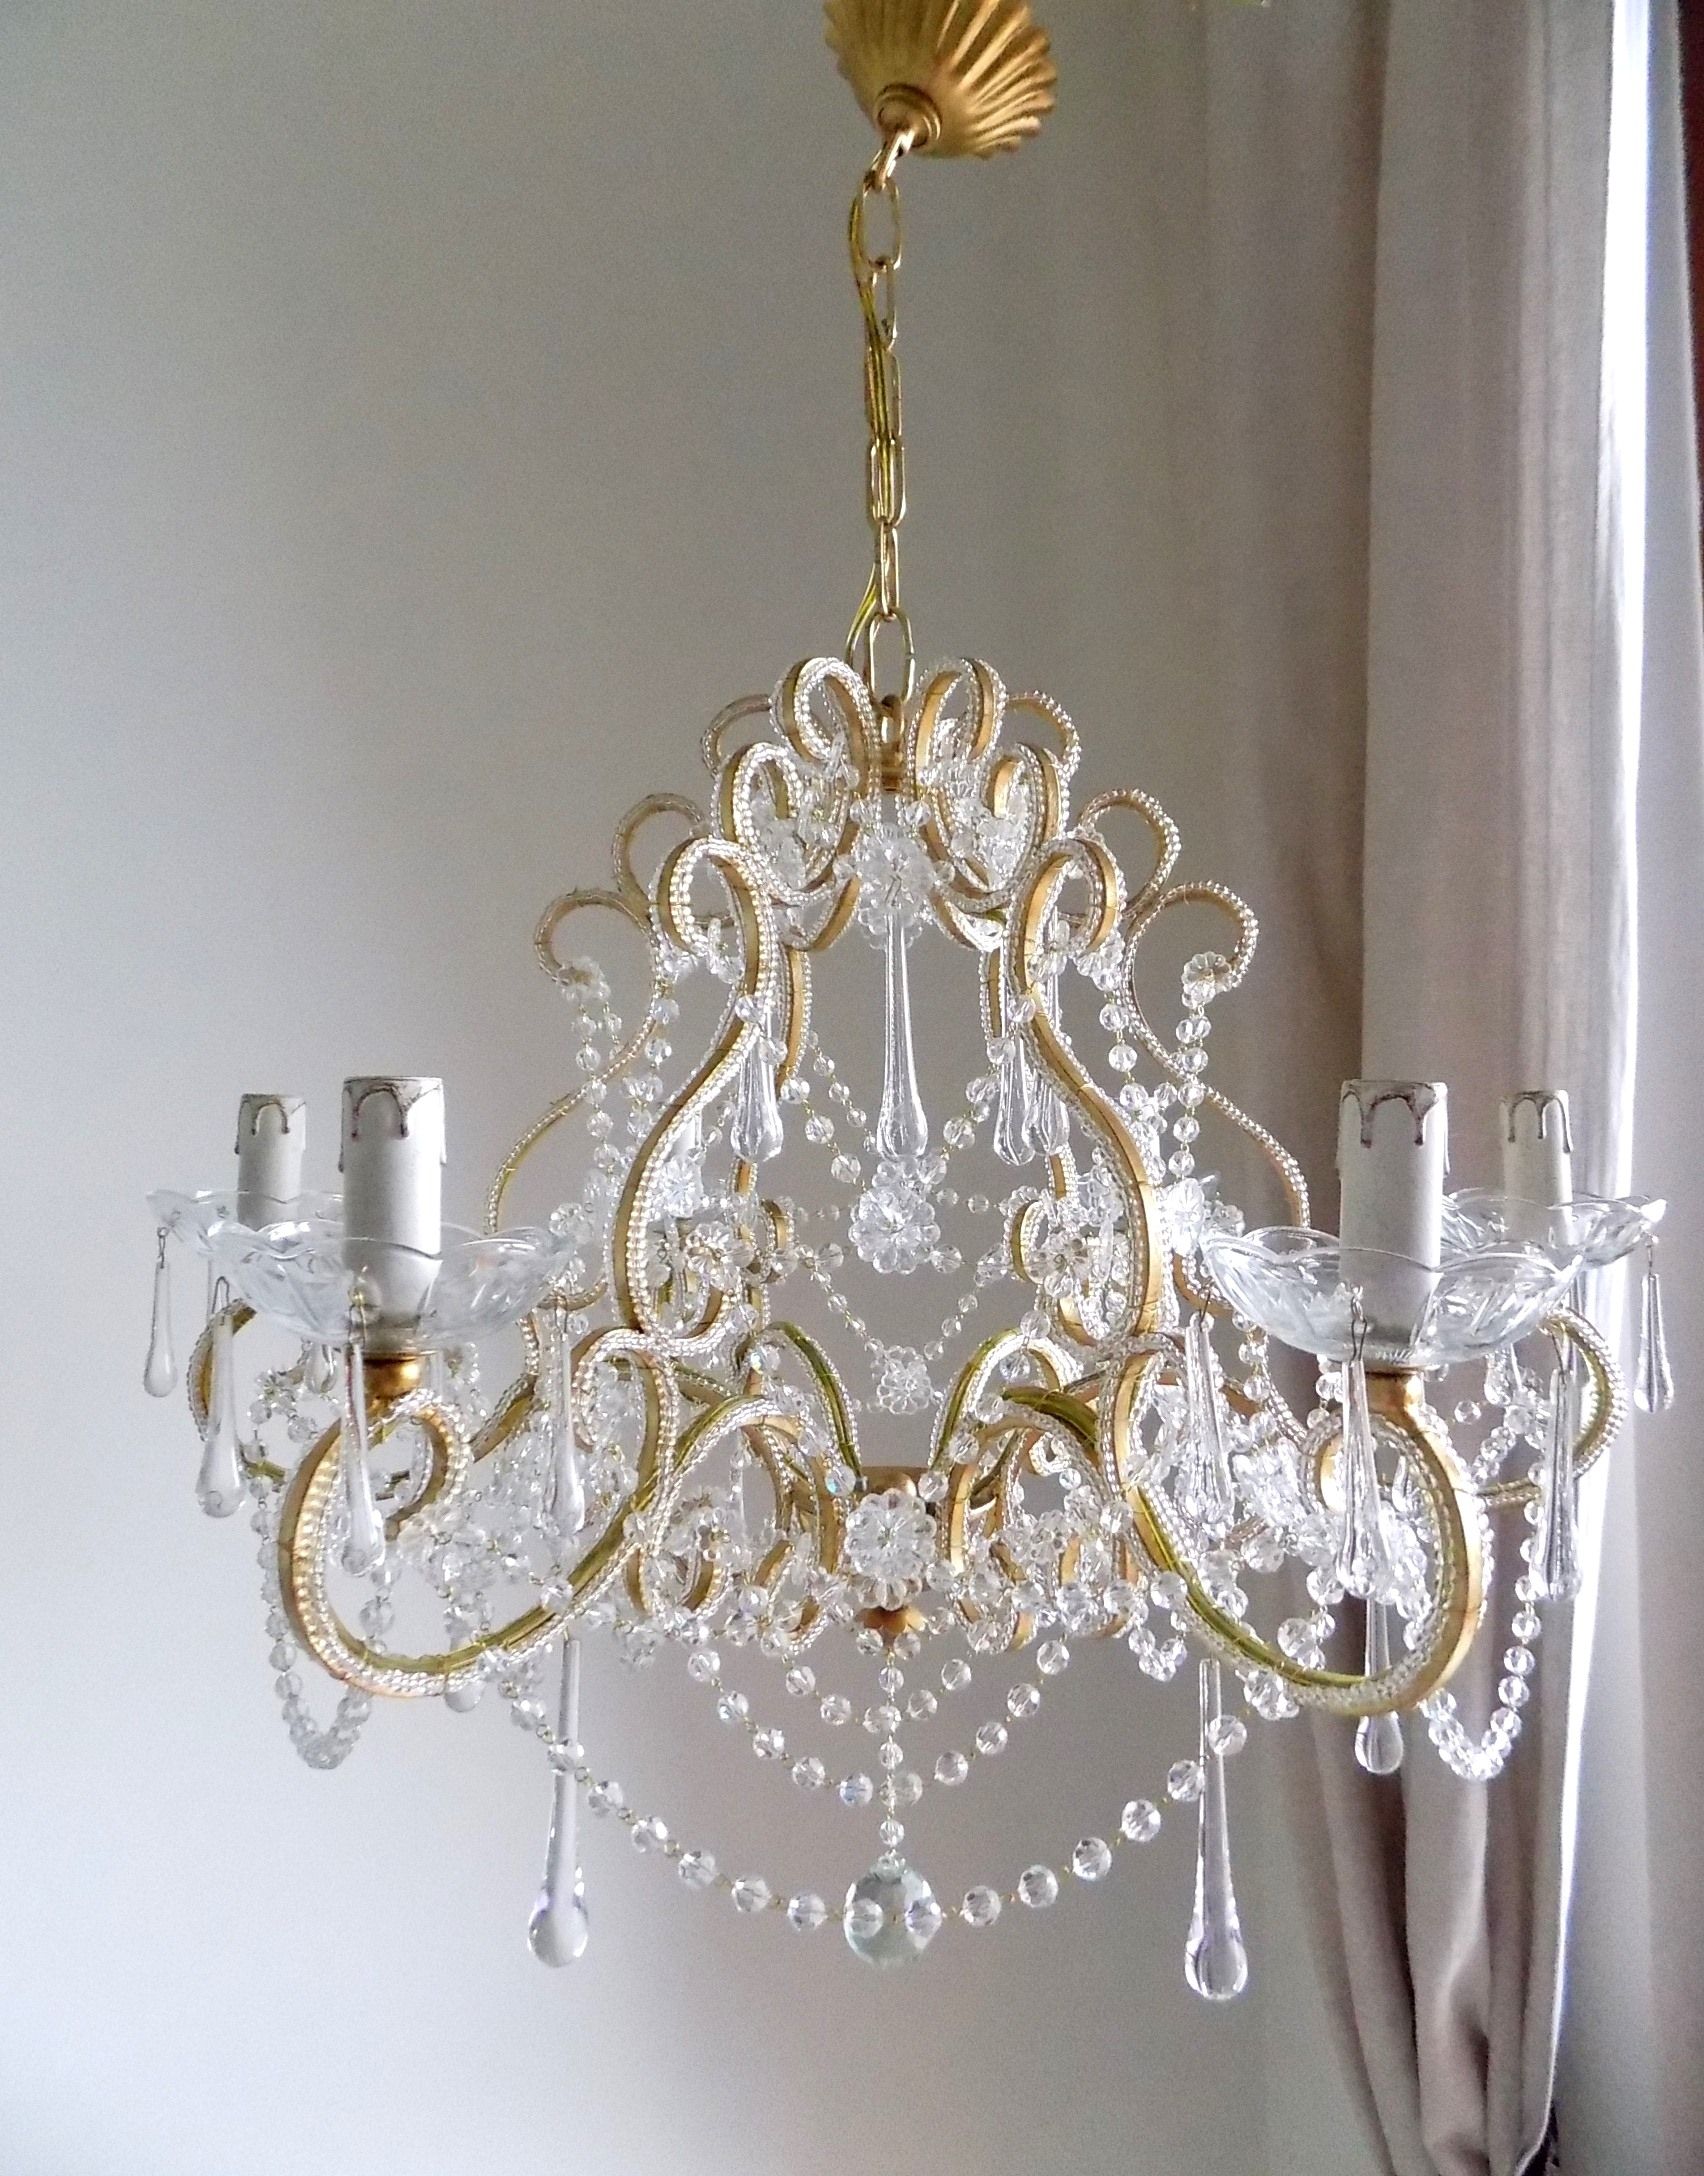 Beaded Crystal Birdcage Chandelier Gold Leaf Lorella Dia Within Gold Leaf Chandelier (View 10 of 15)